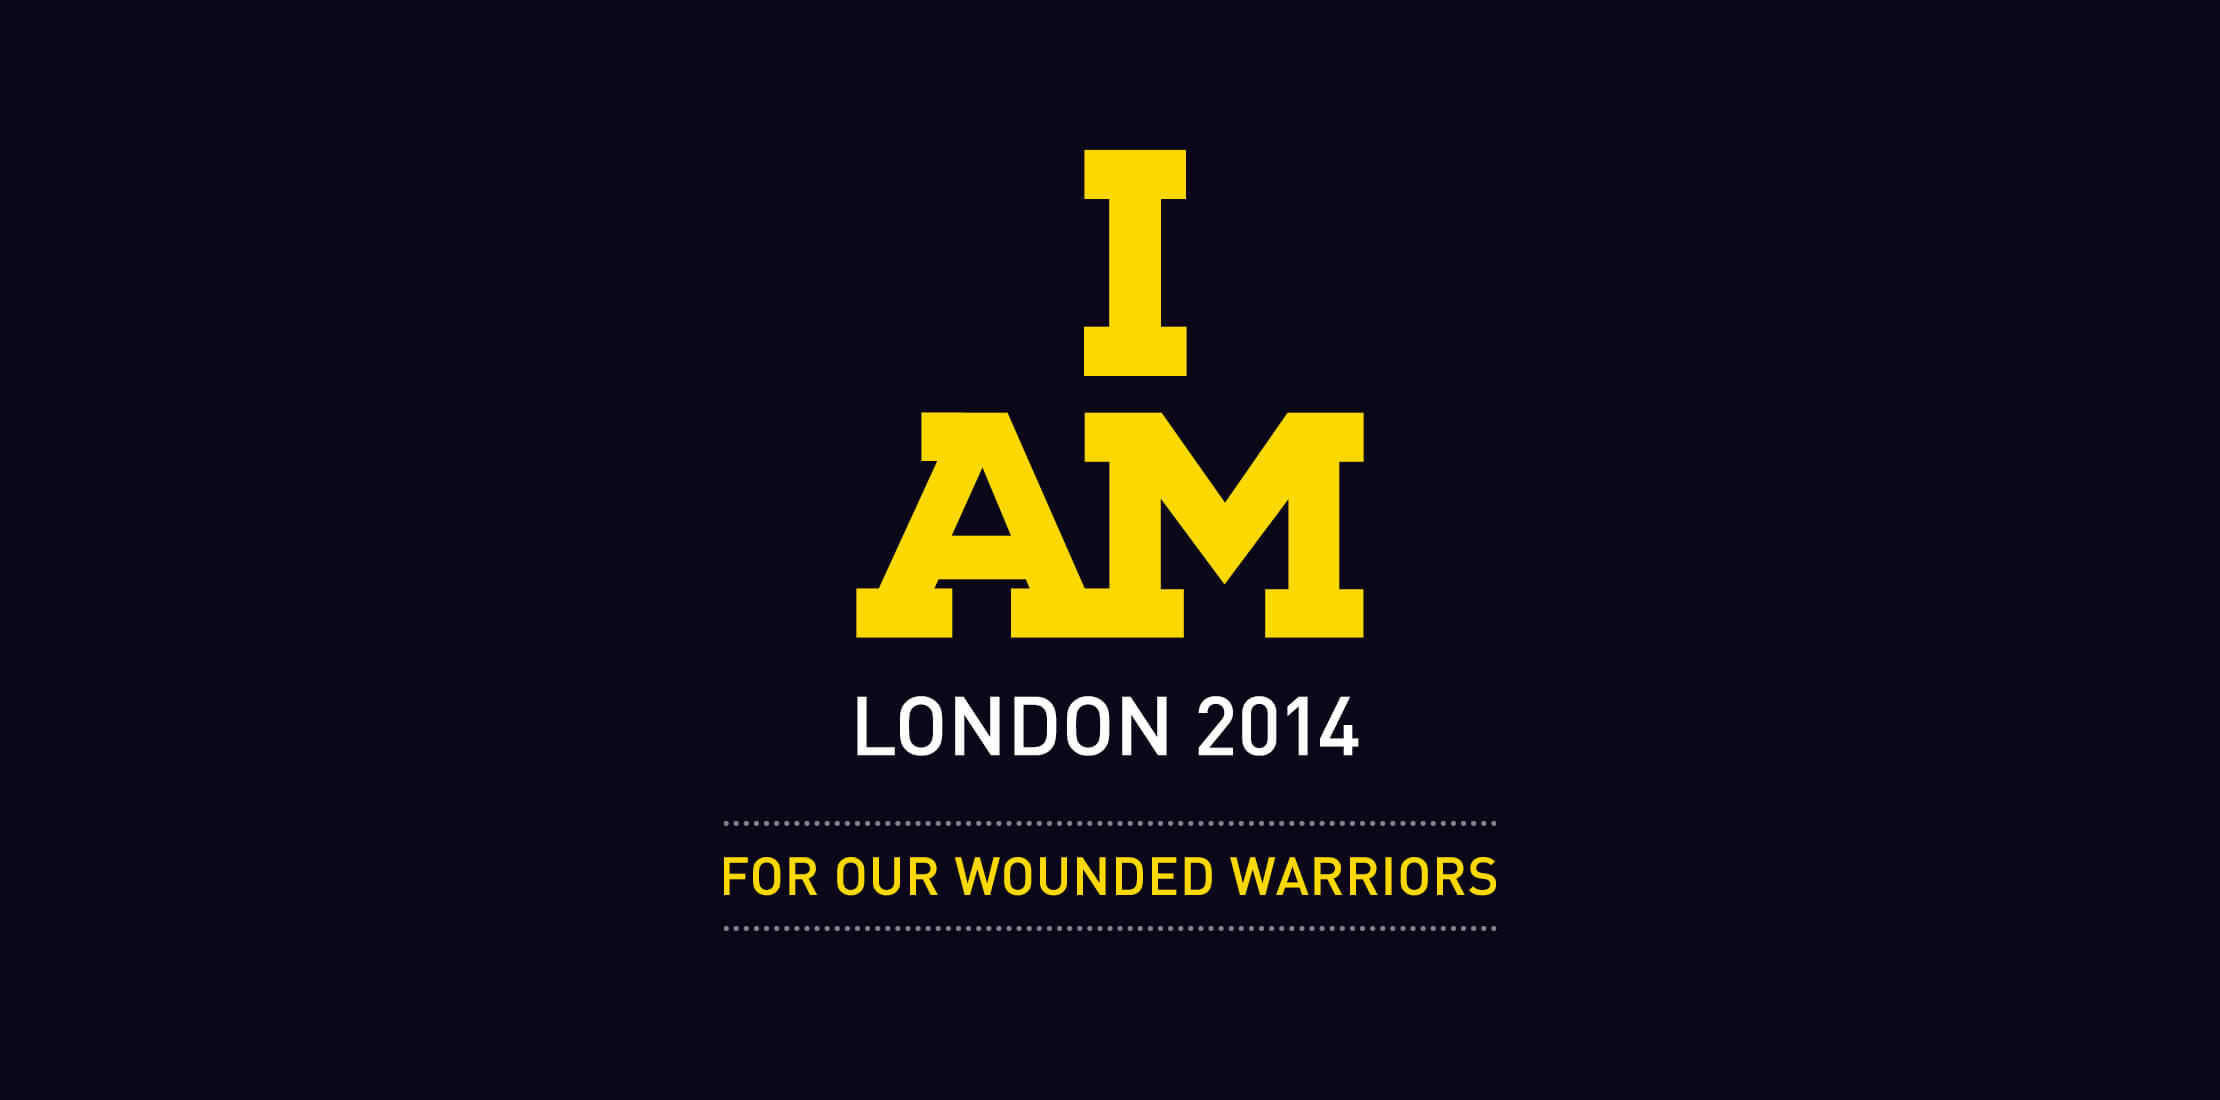 I Am London 2014 Invictus logo in yellow and white on a black background